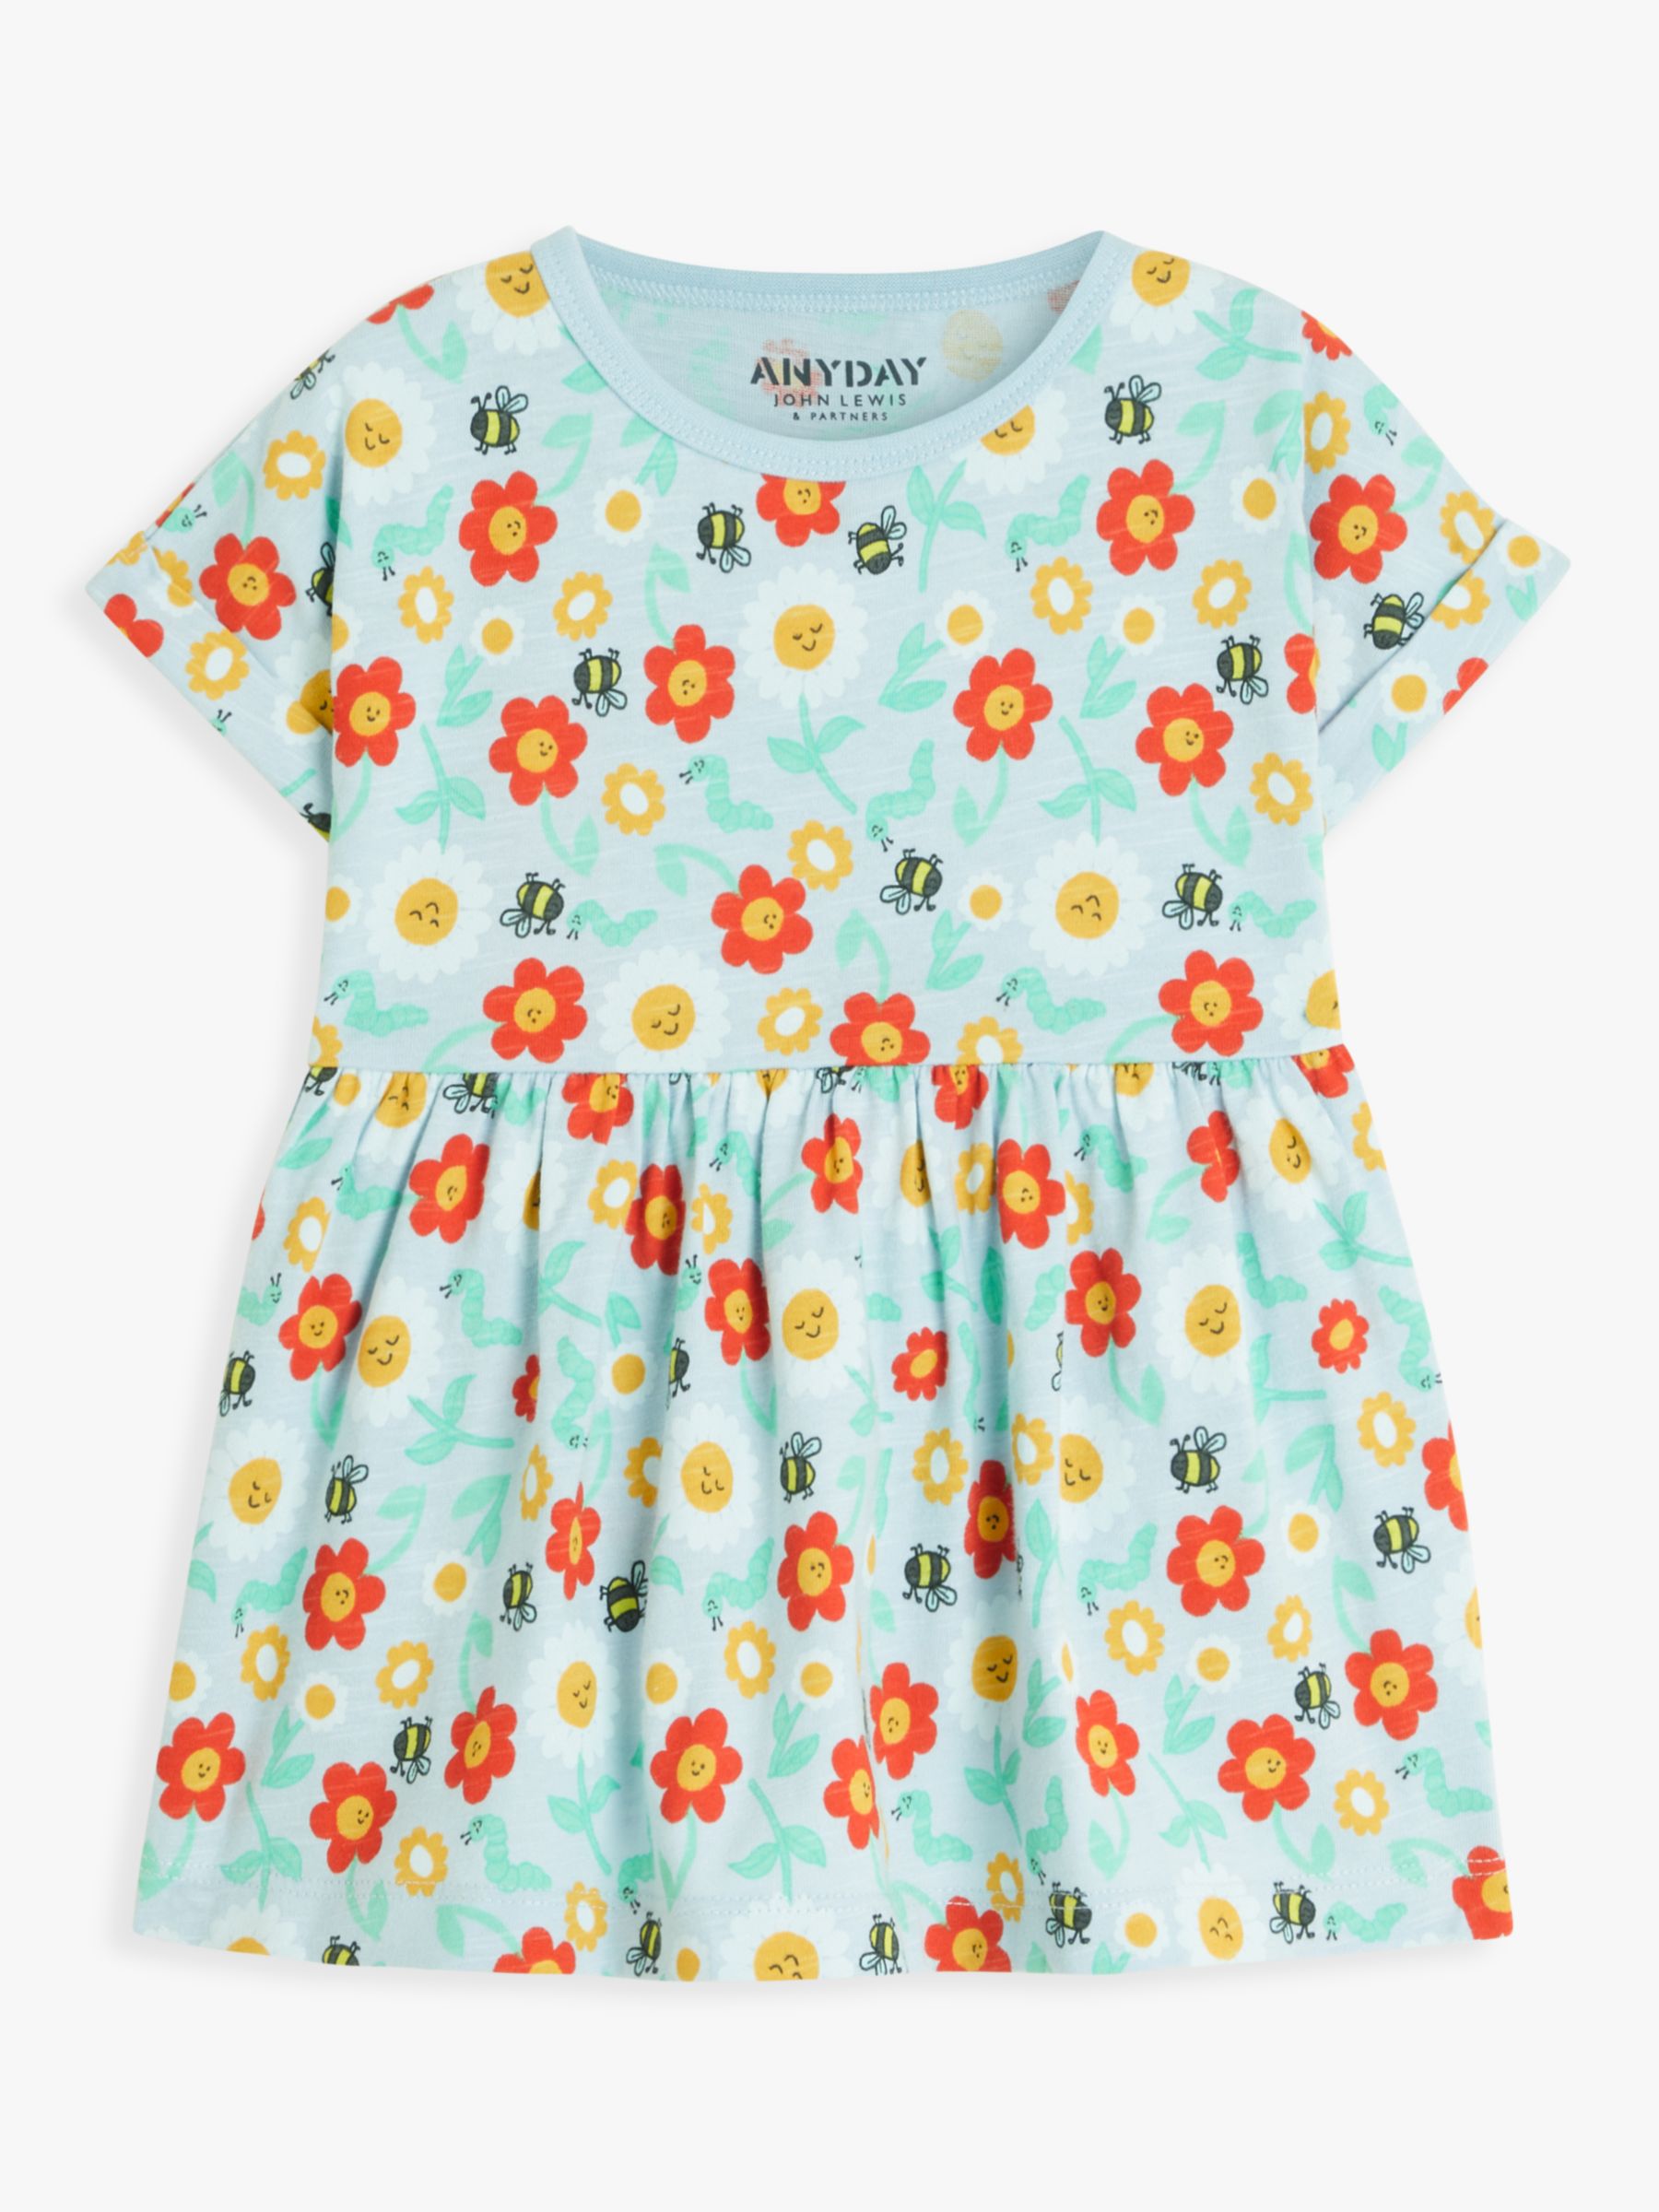 John Lewis ANYDAY Baby Floral Dress, Blue/Multi